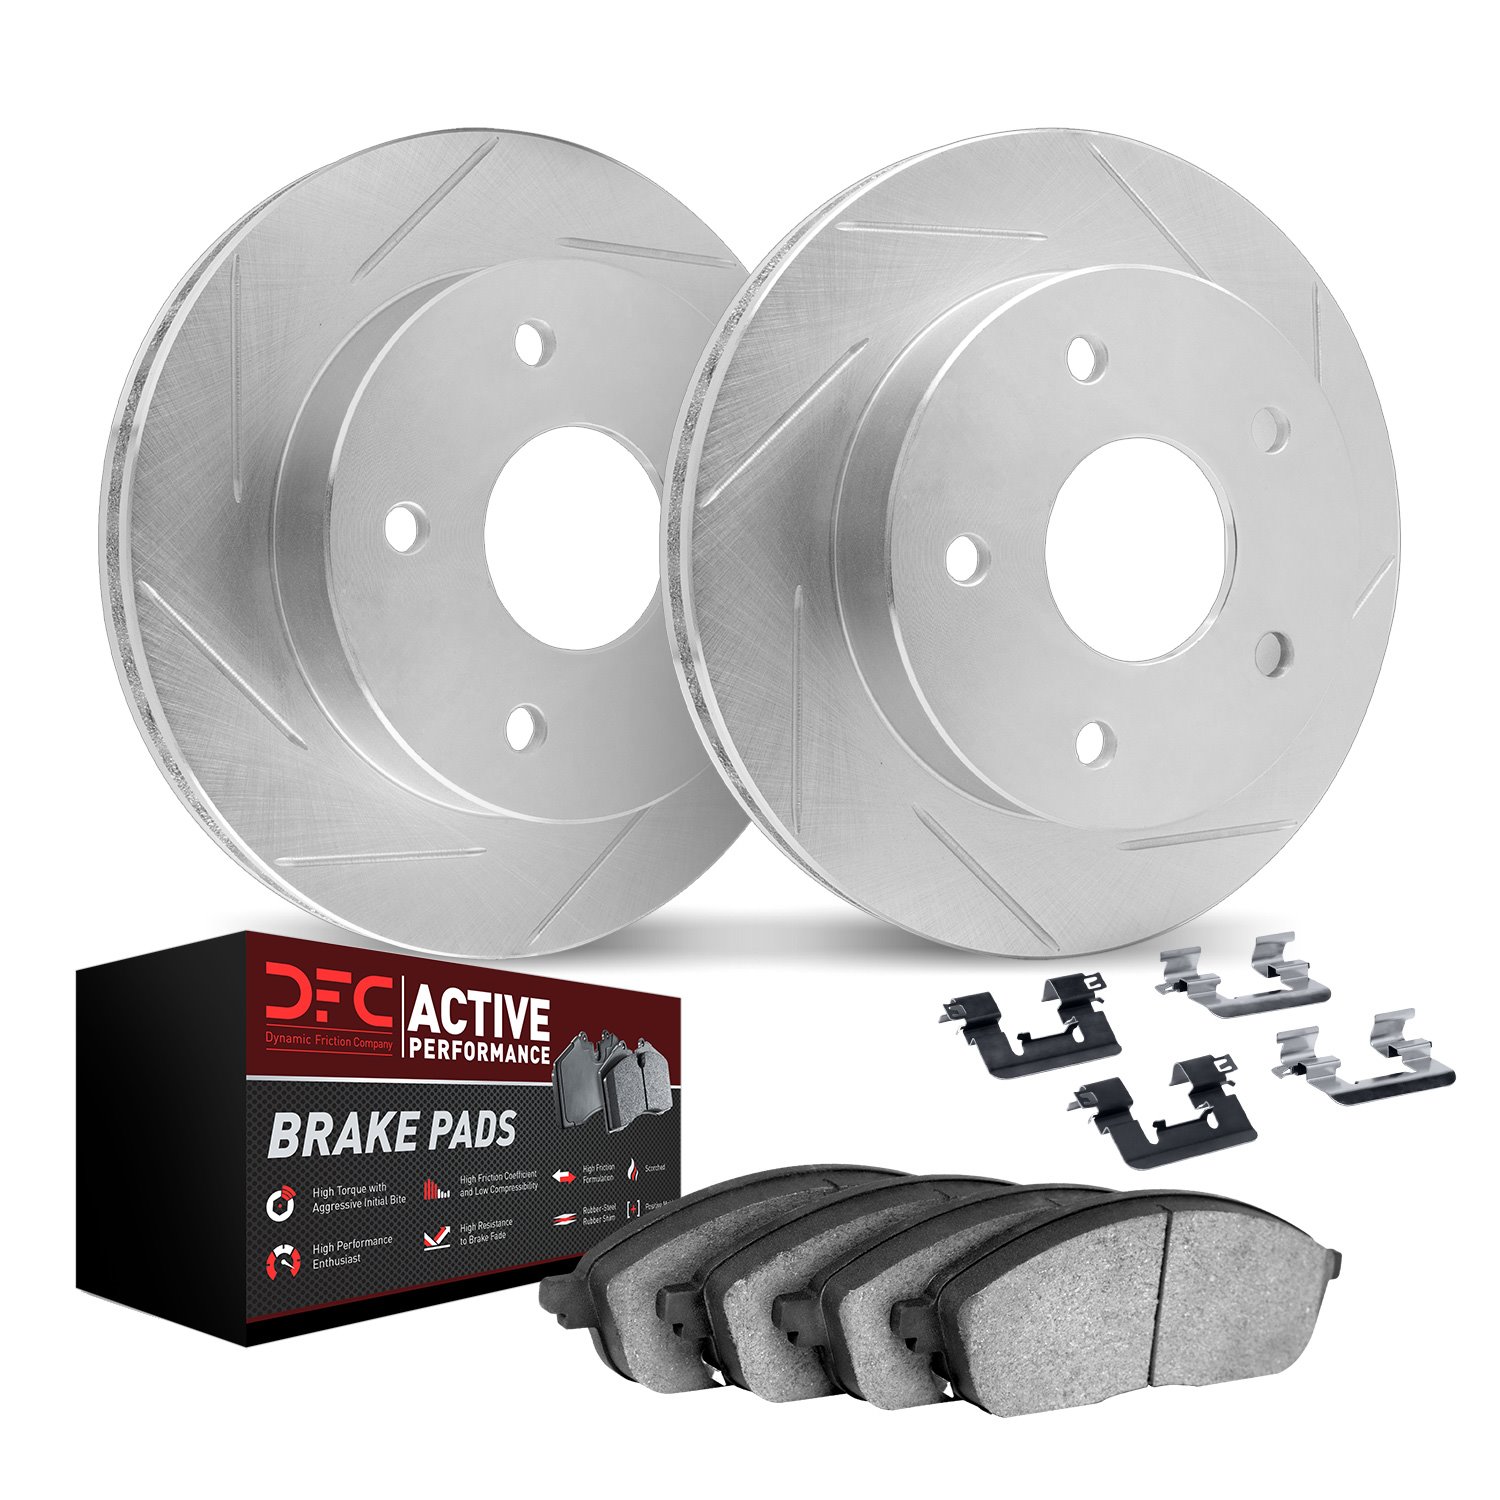 2712-59123 Geoperformance Slotted Brake Rotors with Active Performance Pads Kits & Hardware, 2012-2016 Acura/Honda, Position: Fr